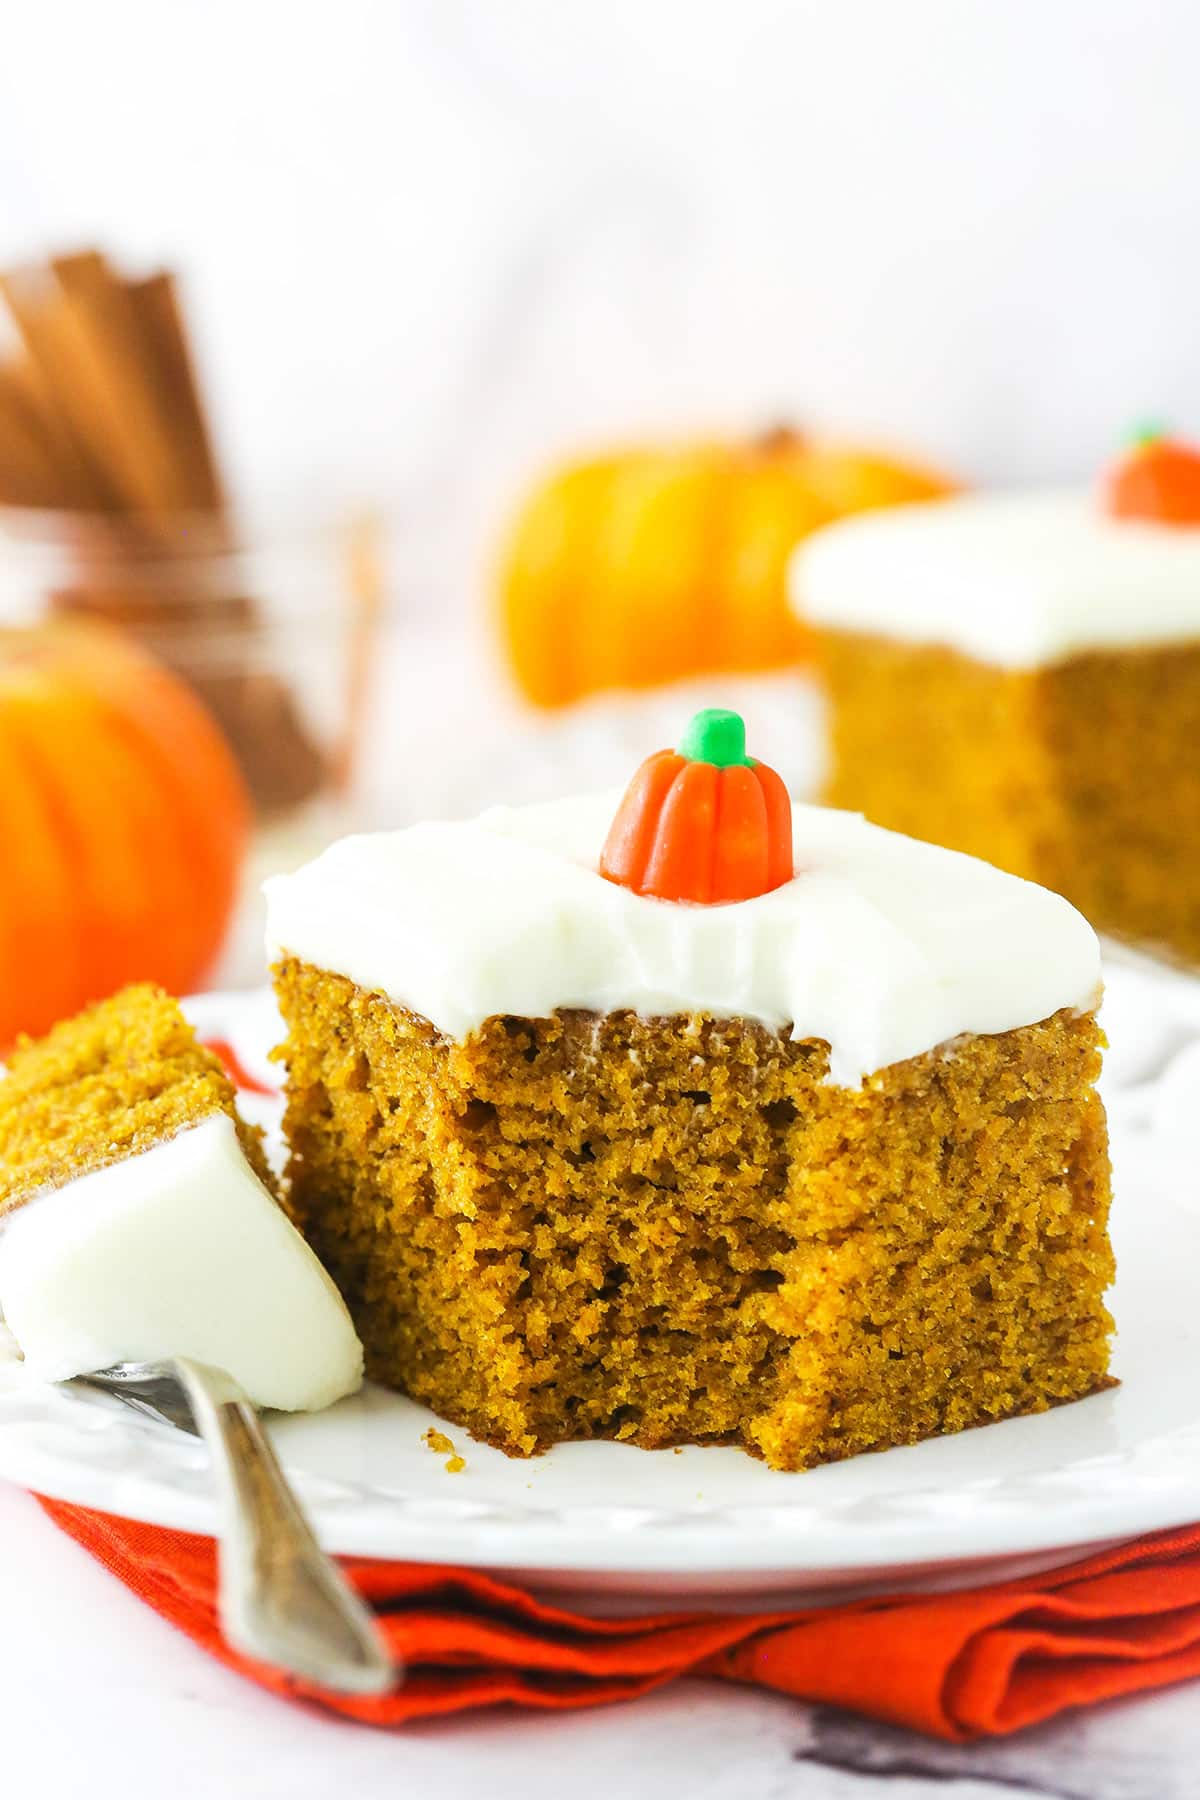 A piece of pumpkin cake on a plate with one bite on a metal dessert fork.